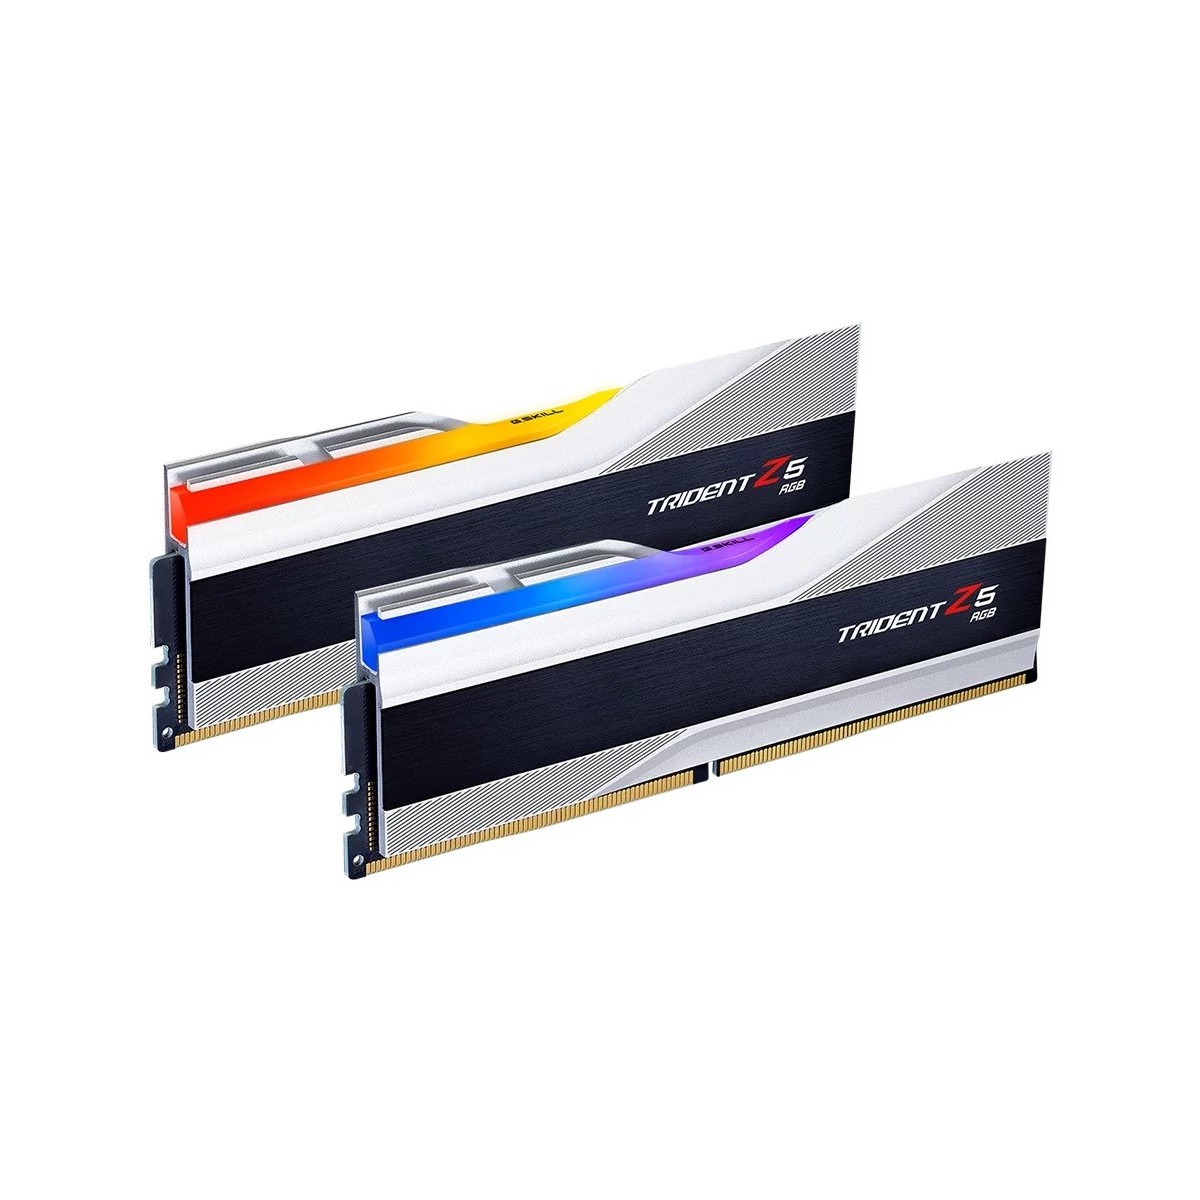 G.Skill D532GB 6800-34 Trident Z5 RGB sr K2 GSK F5-6800J3445G16GX2-TZ5RS